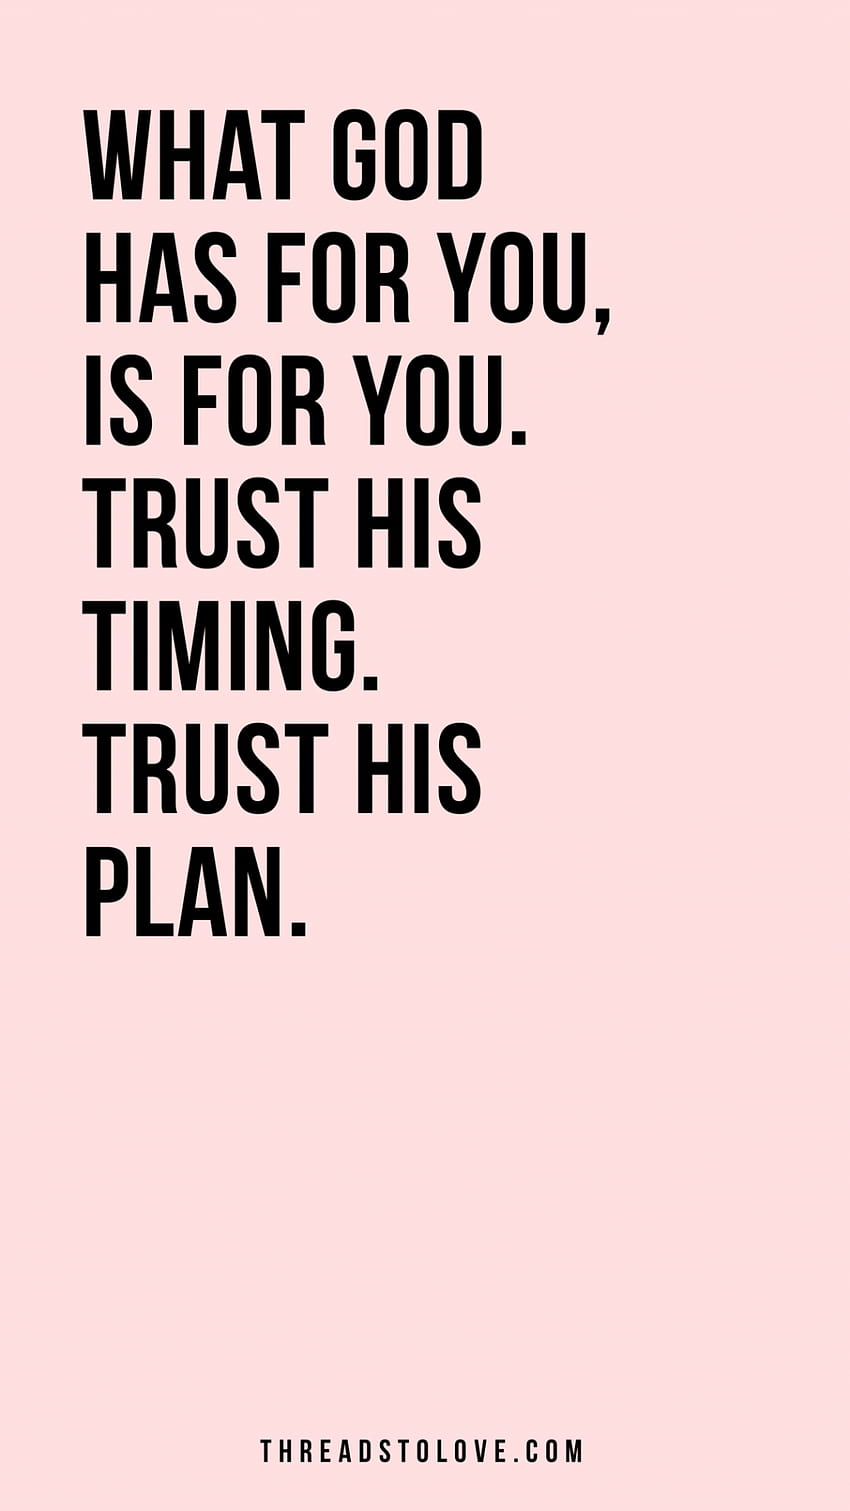 Inspirational Quotes About Gods Timing QuotesGram